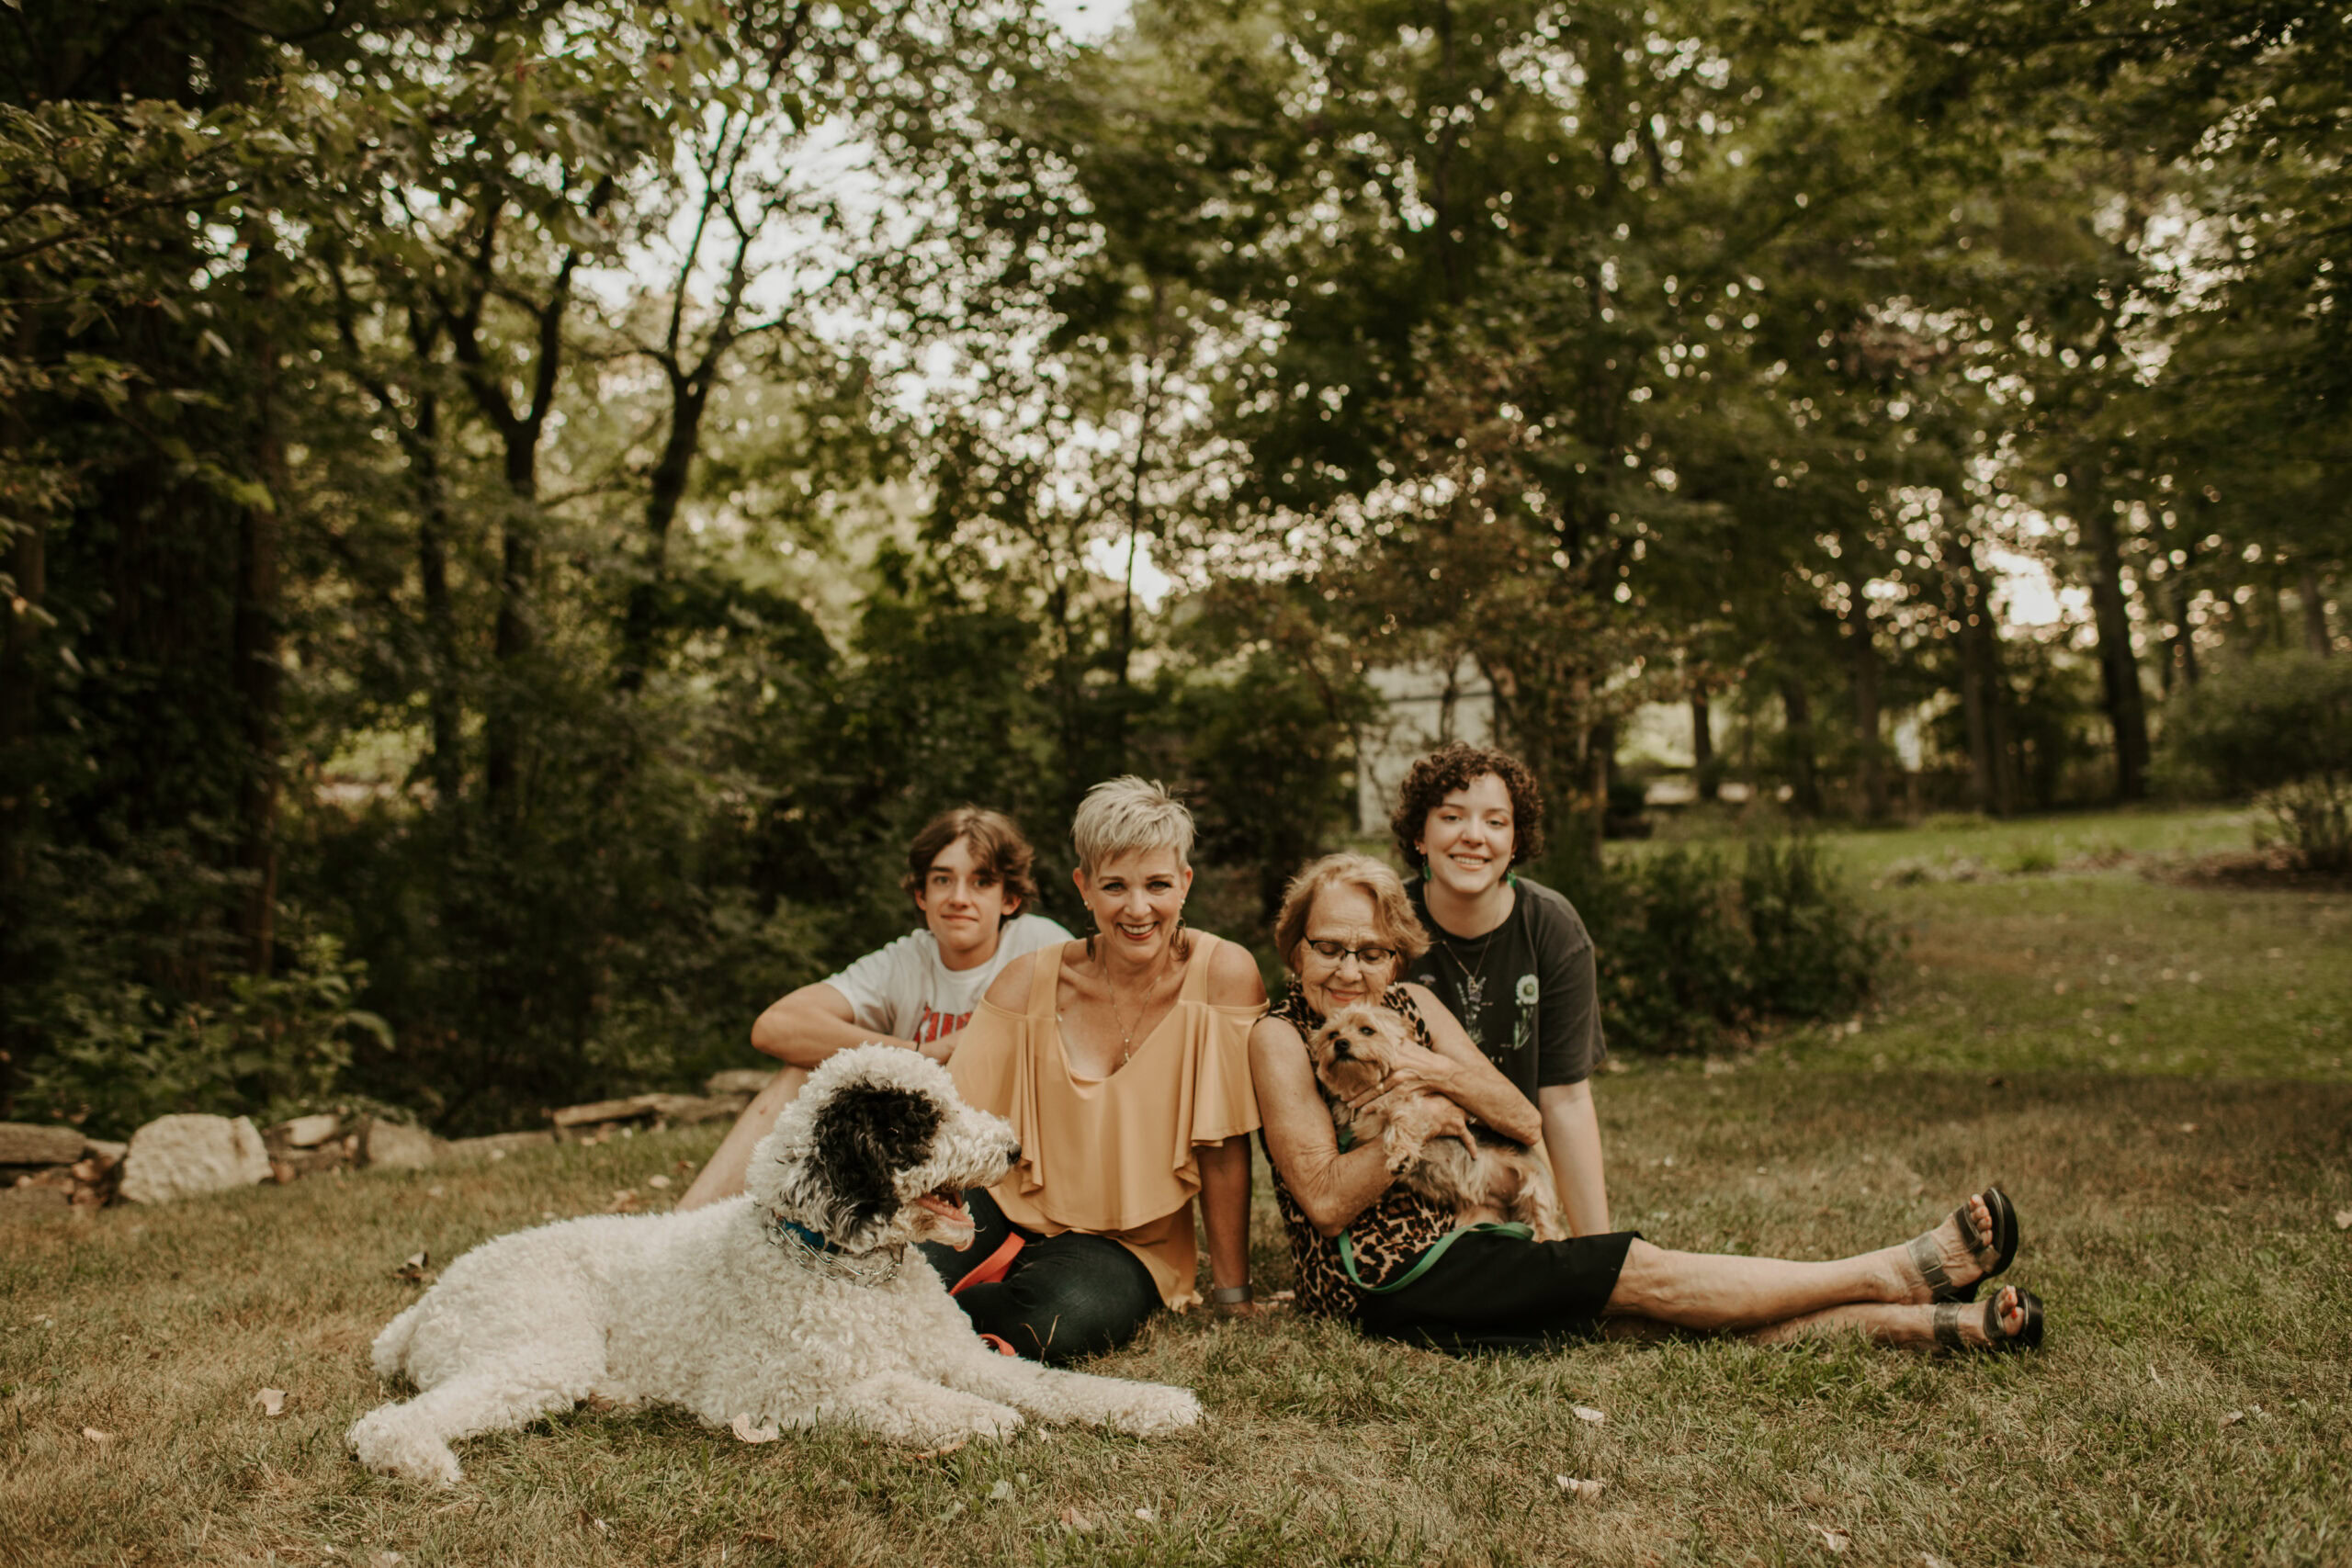 Dr. Kris's family, four people building a strong foundation of friendship sit on the grass with two dogs, surrounded by trees.